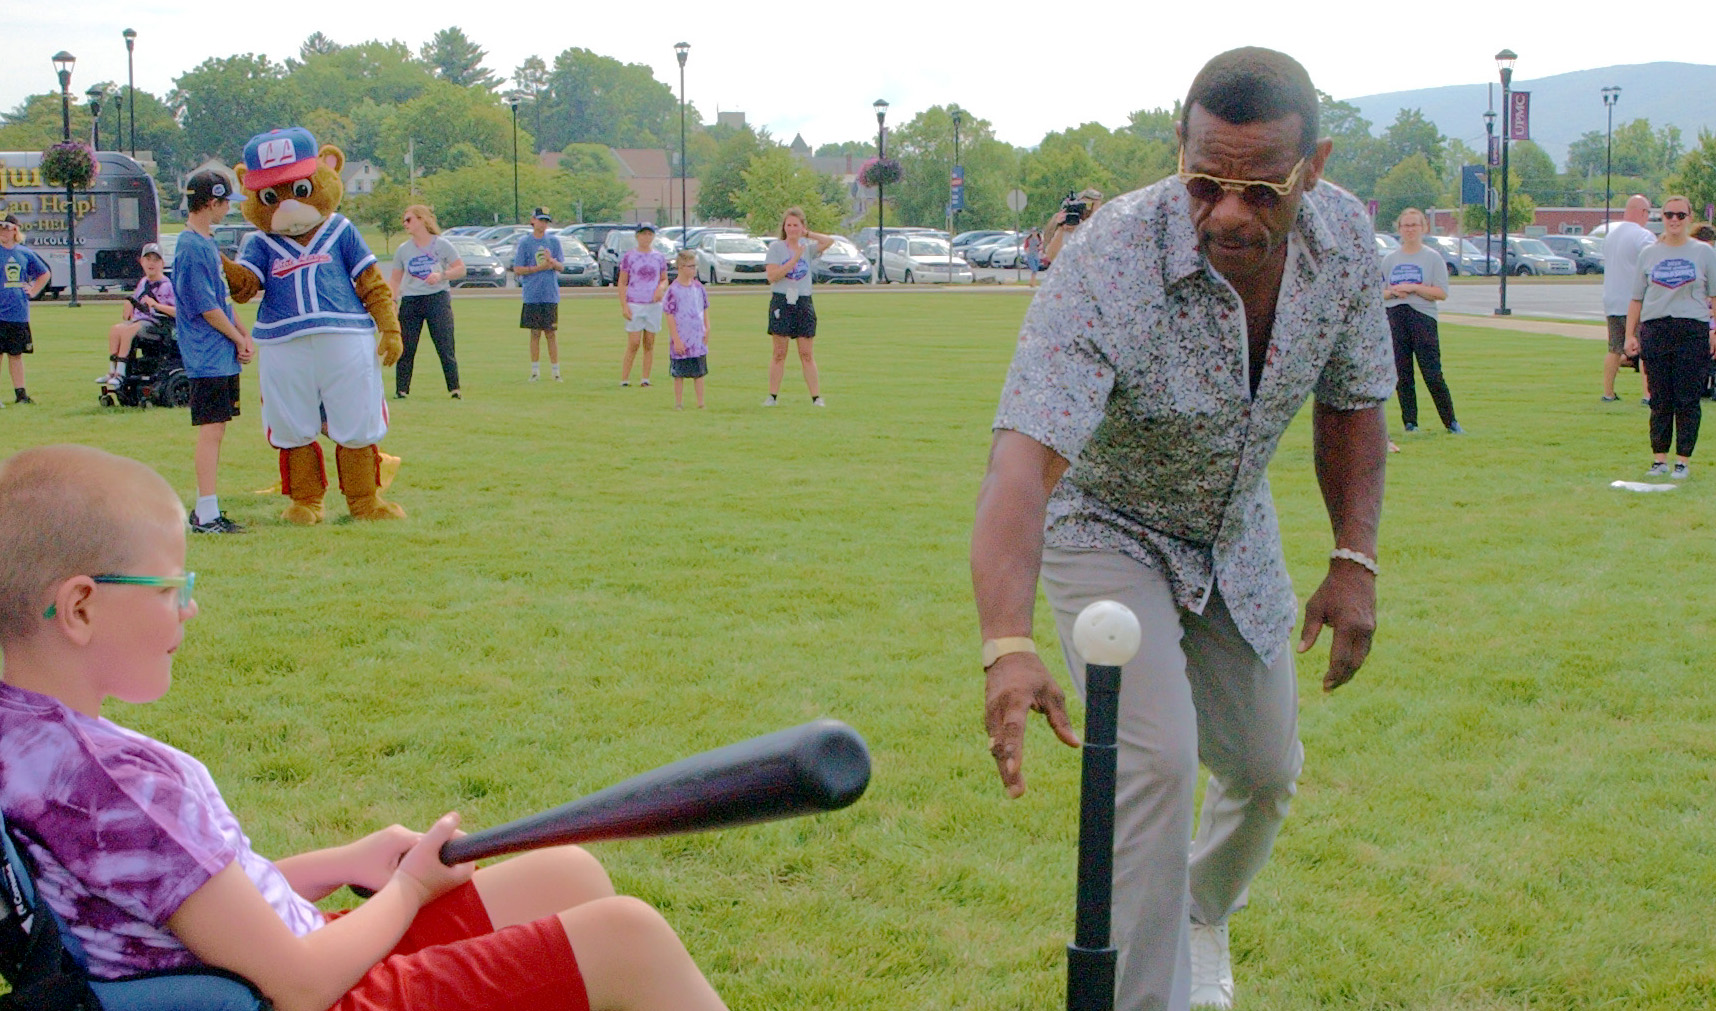 Rickey Henderson plays Wiffle Ball, coaches at Little League World Series  related events 